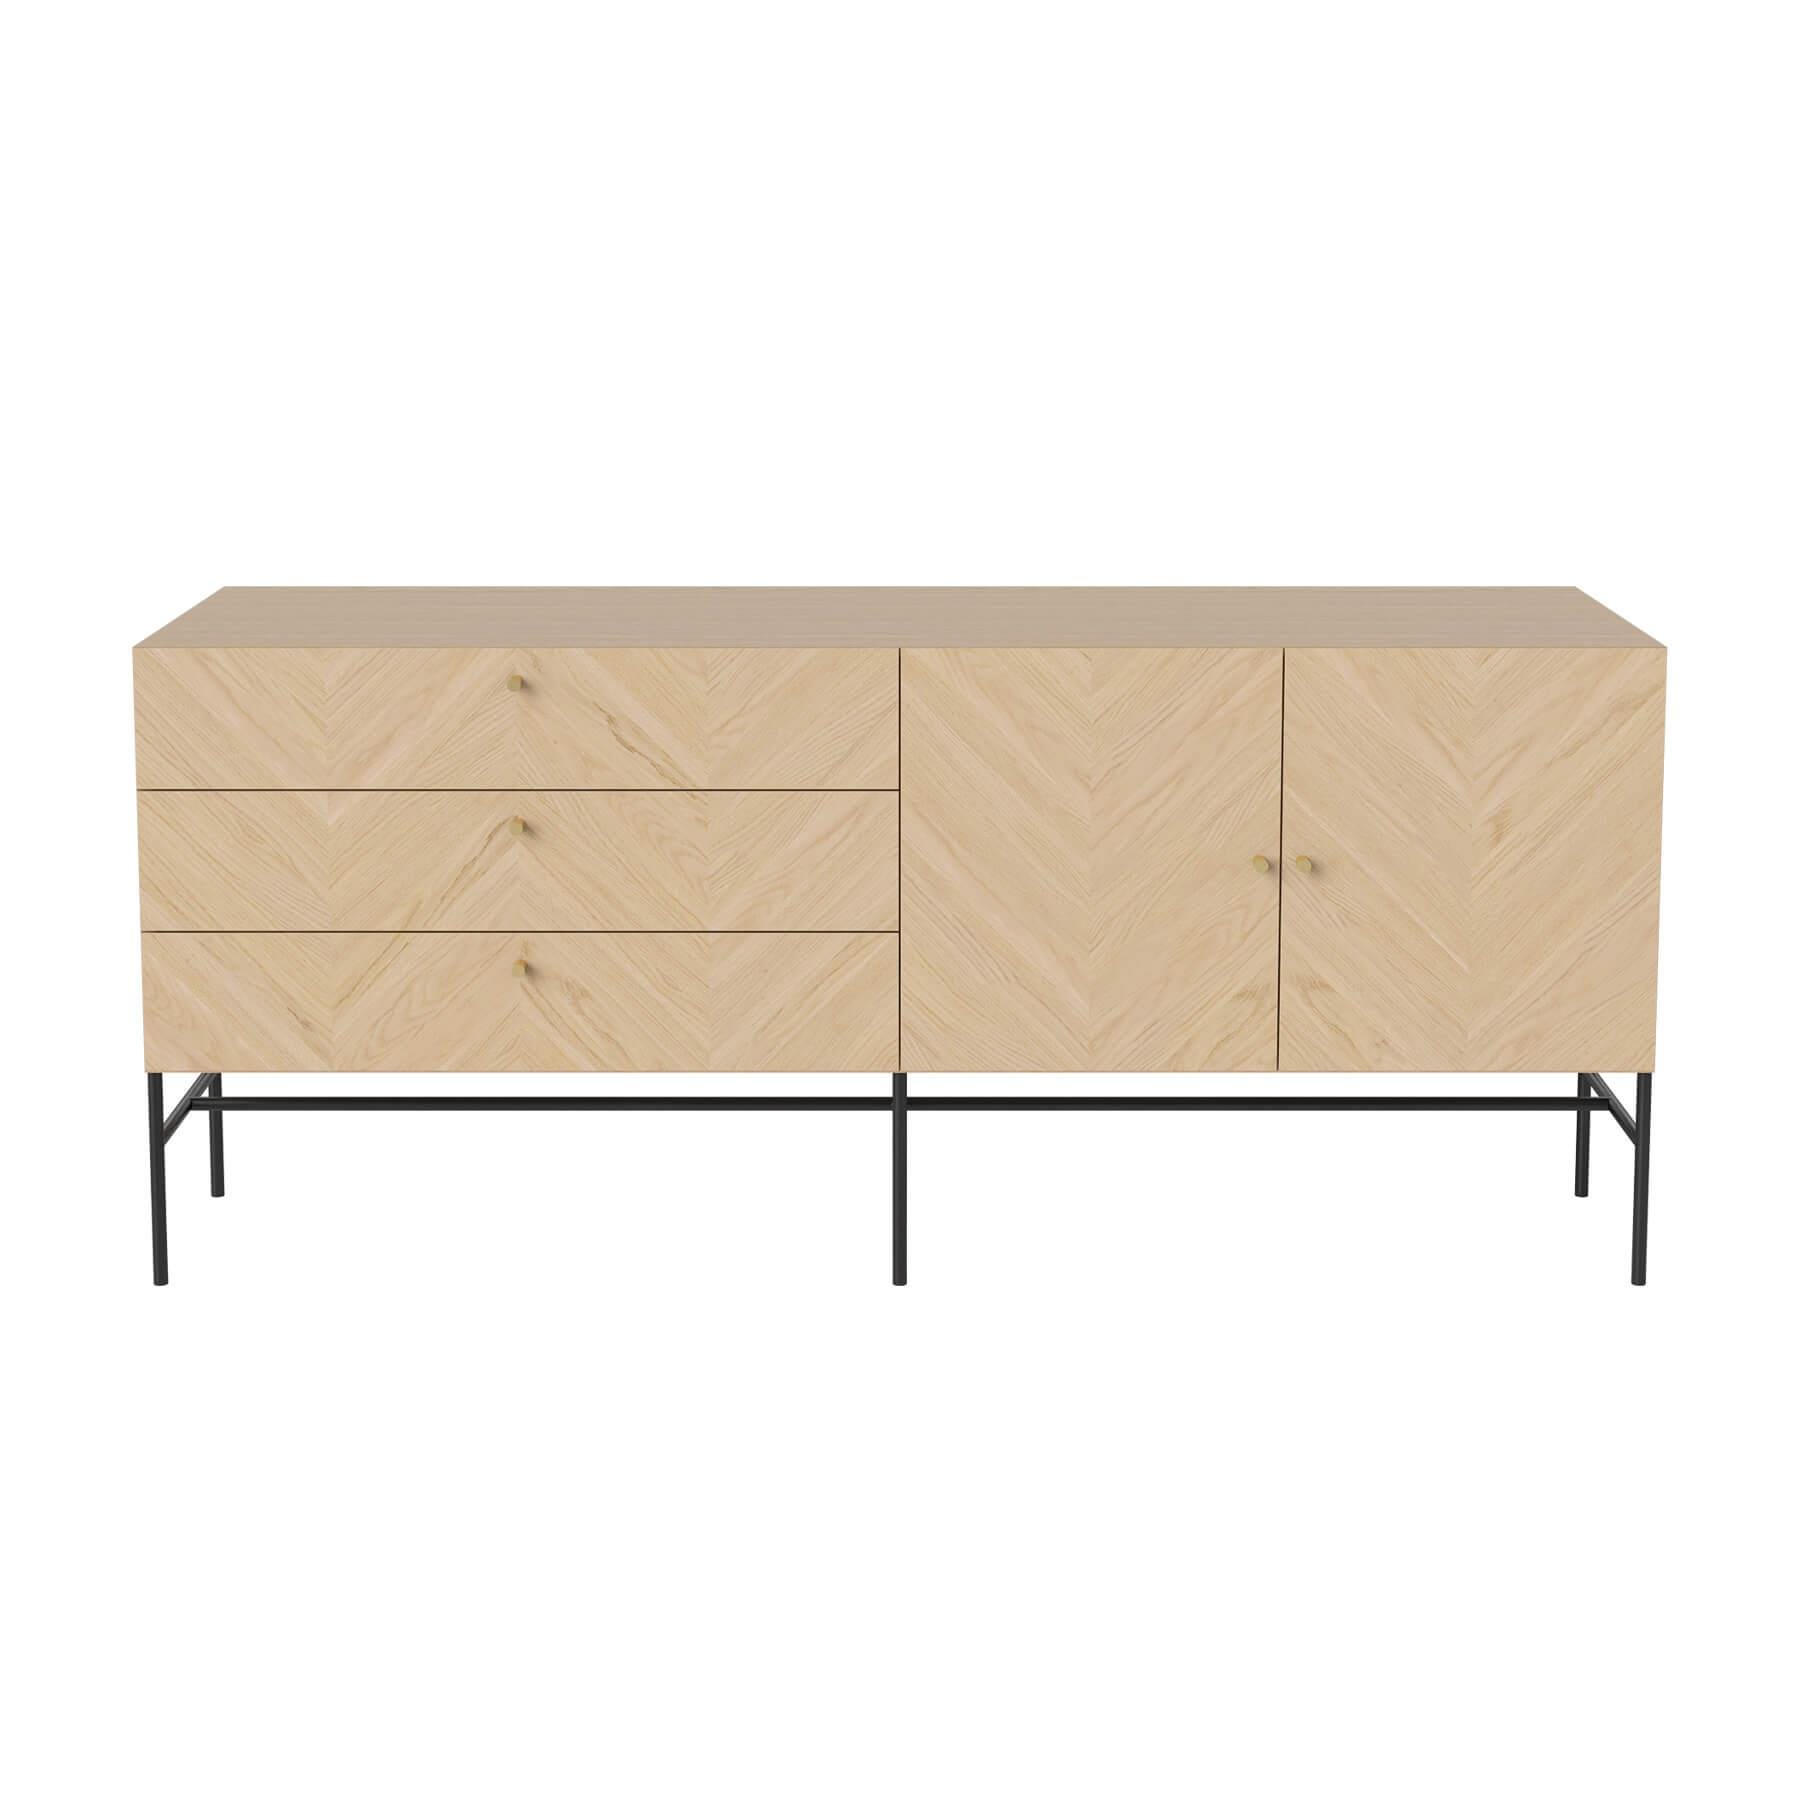 Bolia Luxe Sideboard White Pigmented Oak Brass Door Knobs Light Wood Designer Furniture From Holloways Of Ludlow